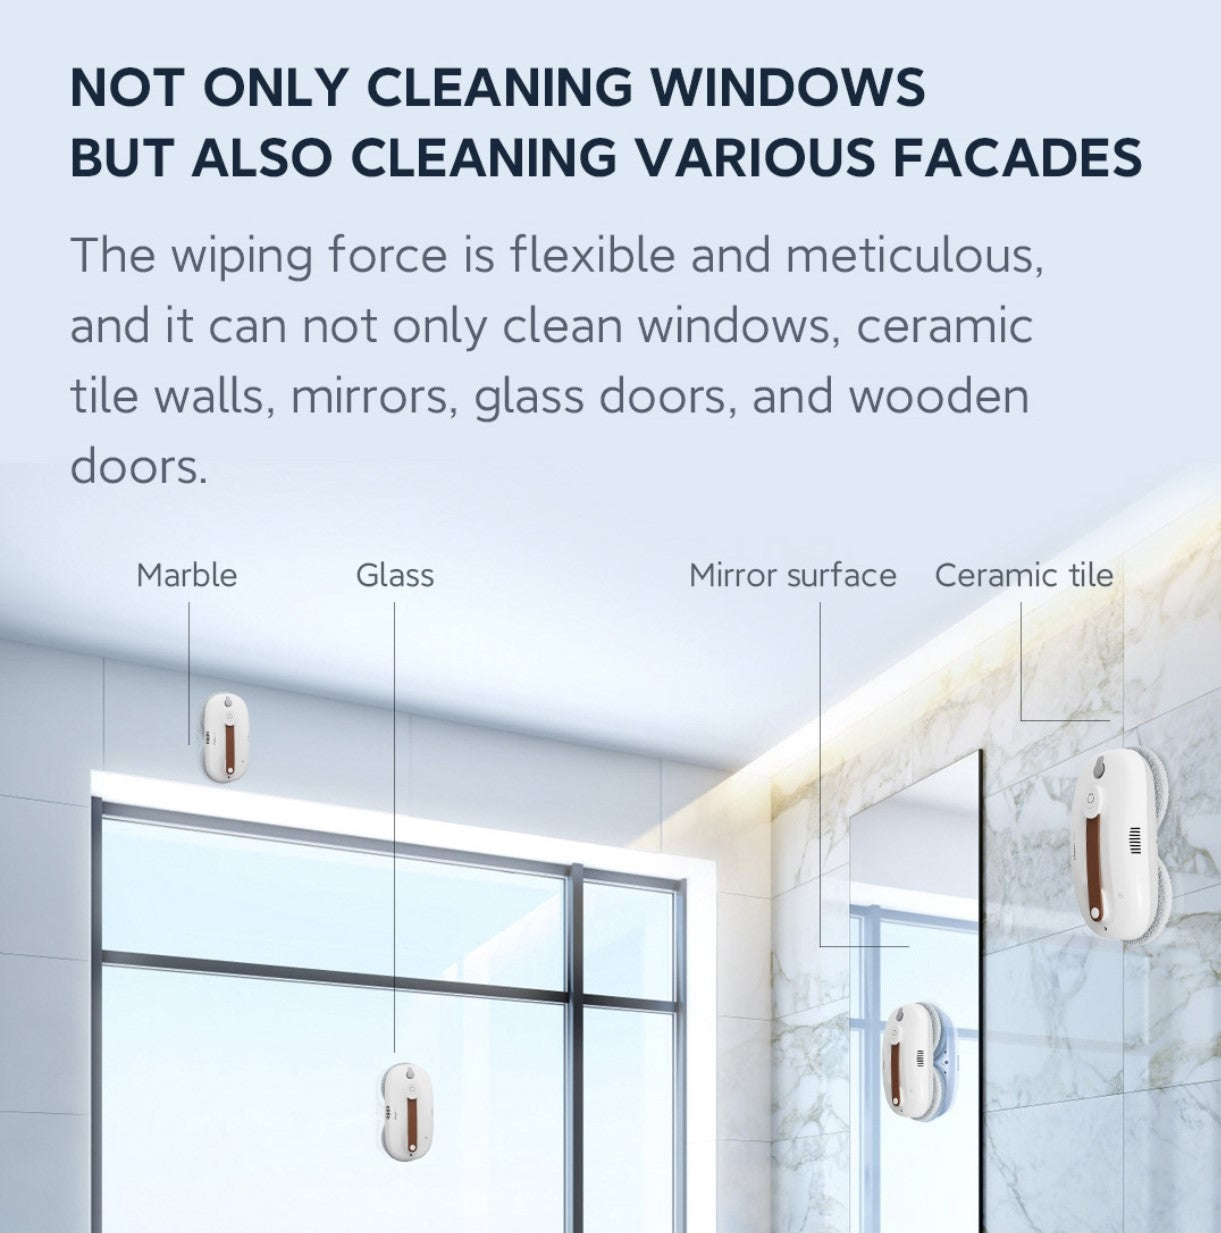 NOT ONLY CLEANING WINDOWS BUT ALSO CLEANING VARIOUS FACADES  The wiping force is flexible and meticulous, and it can not only clean windows, ceramic tile walls, mirrors, glass doors, and wooden doors.